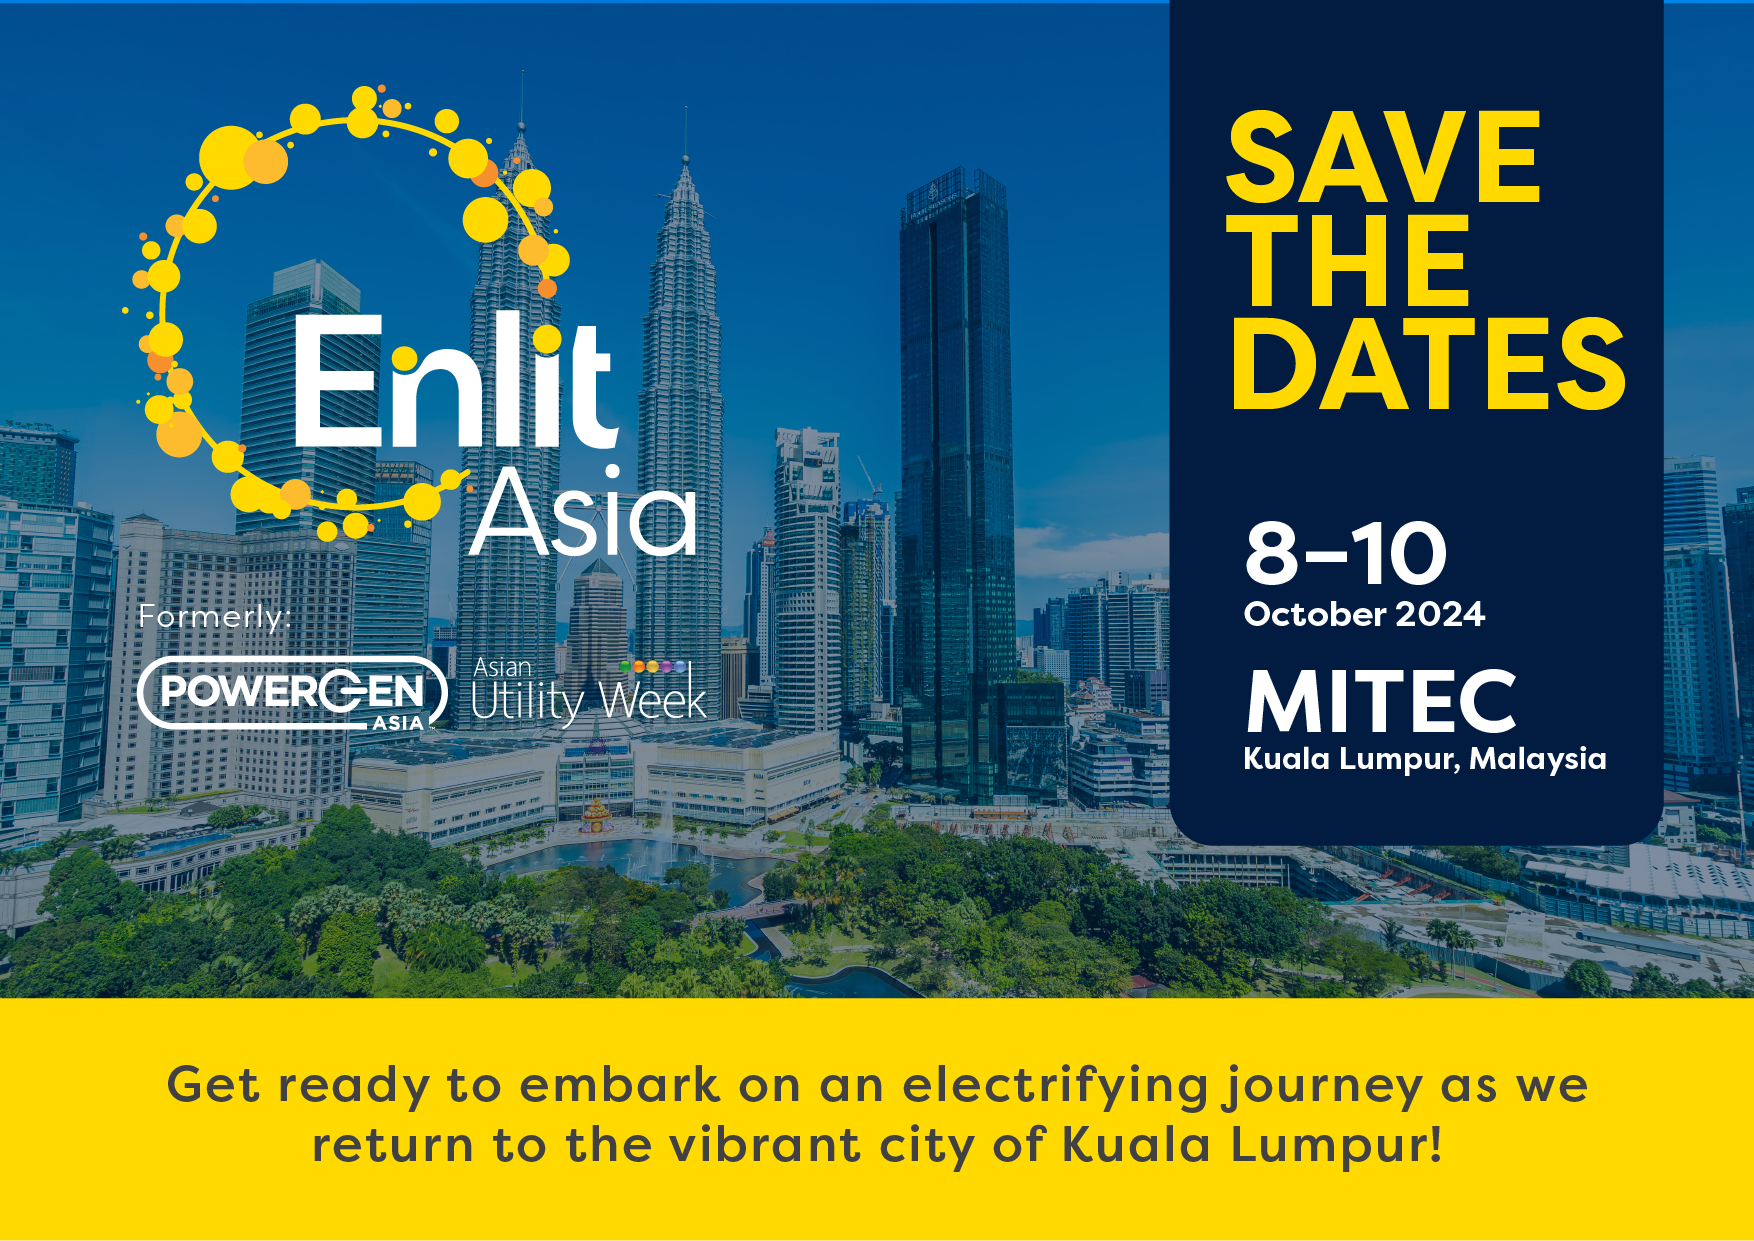 Save the dates - Enlit Asia 2024